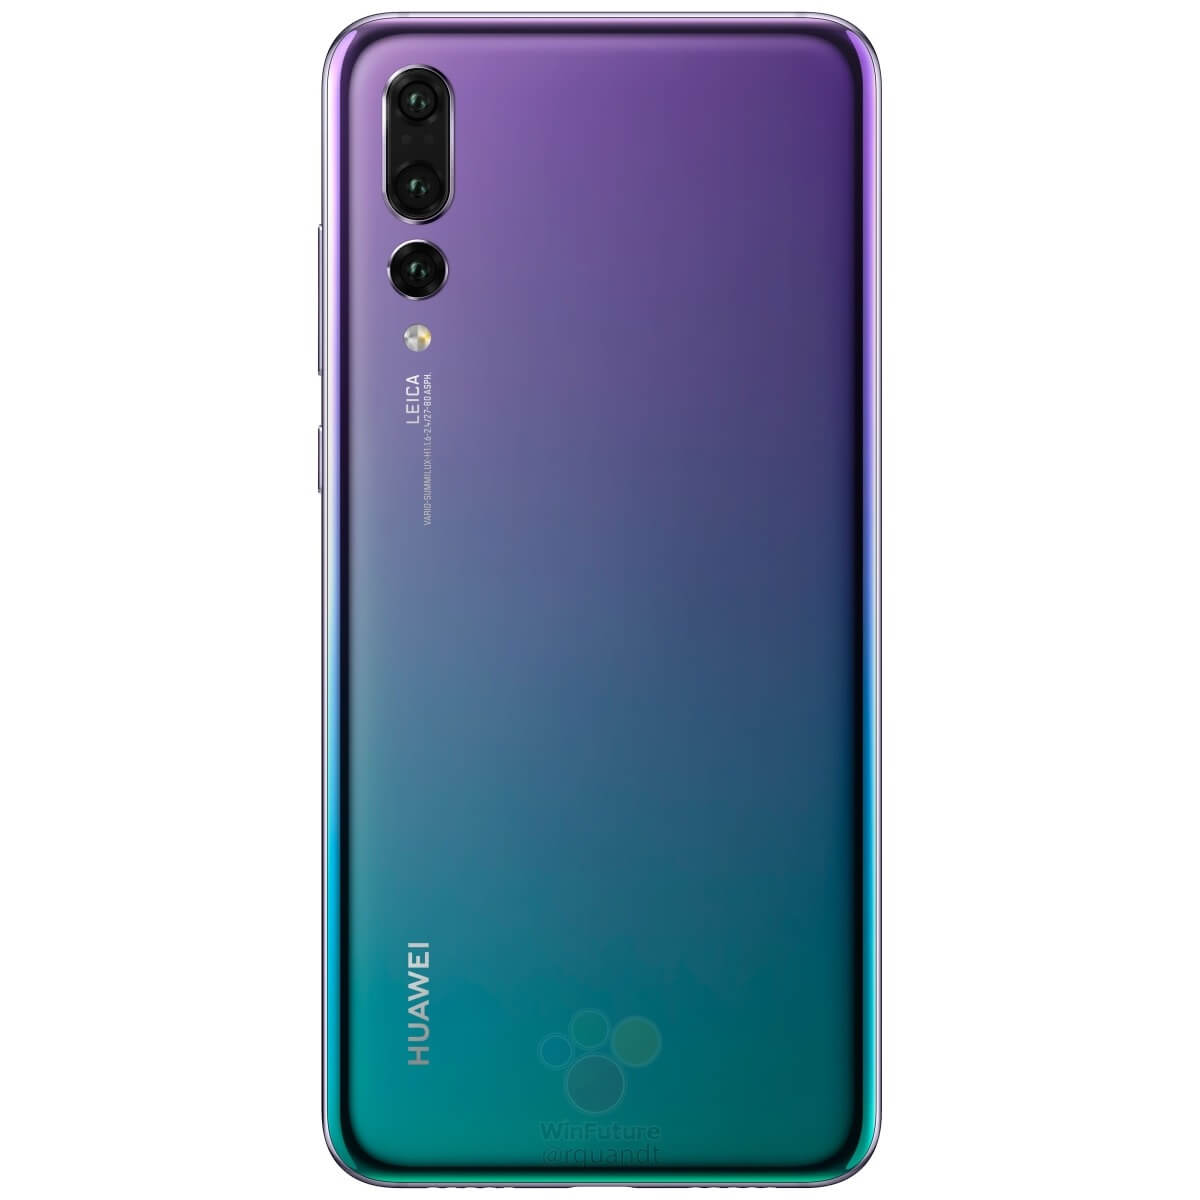 Huawei Mate 20 Pro Android smartphone.Announced Oct Features ″ display, Kirin chipset, mAh battery, GB storage, 8 GB RAM, Corning Gorilla Glass 5.